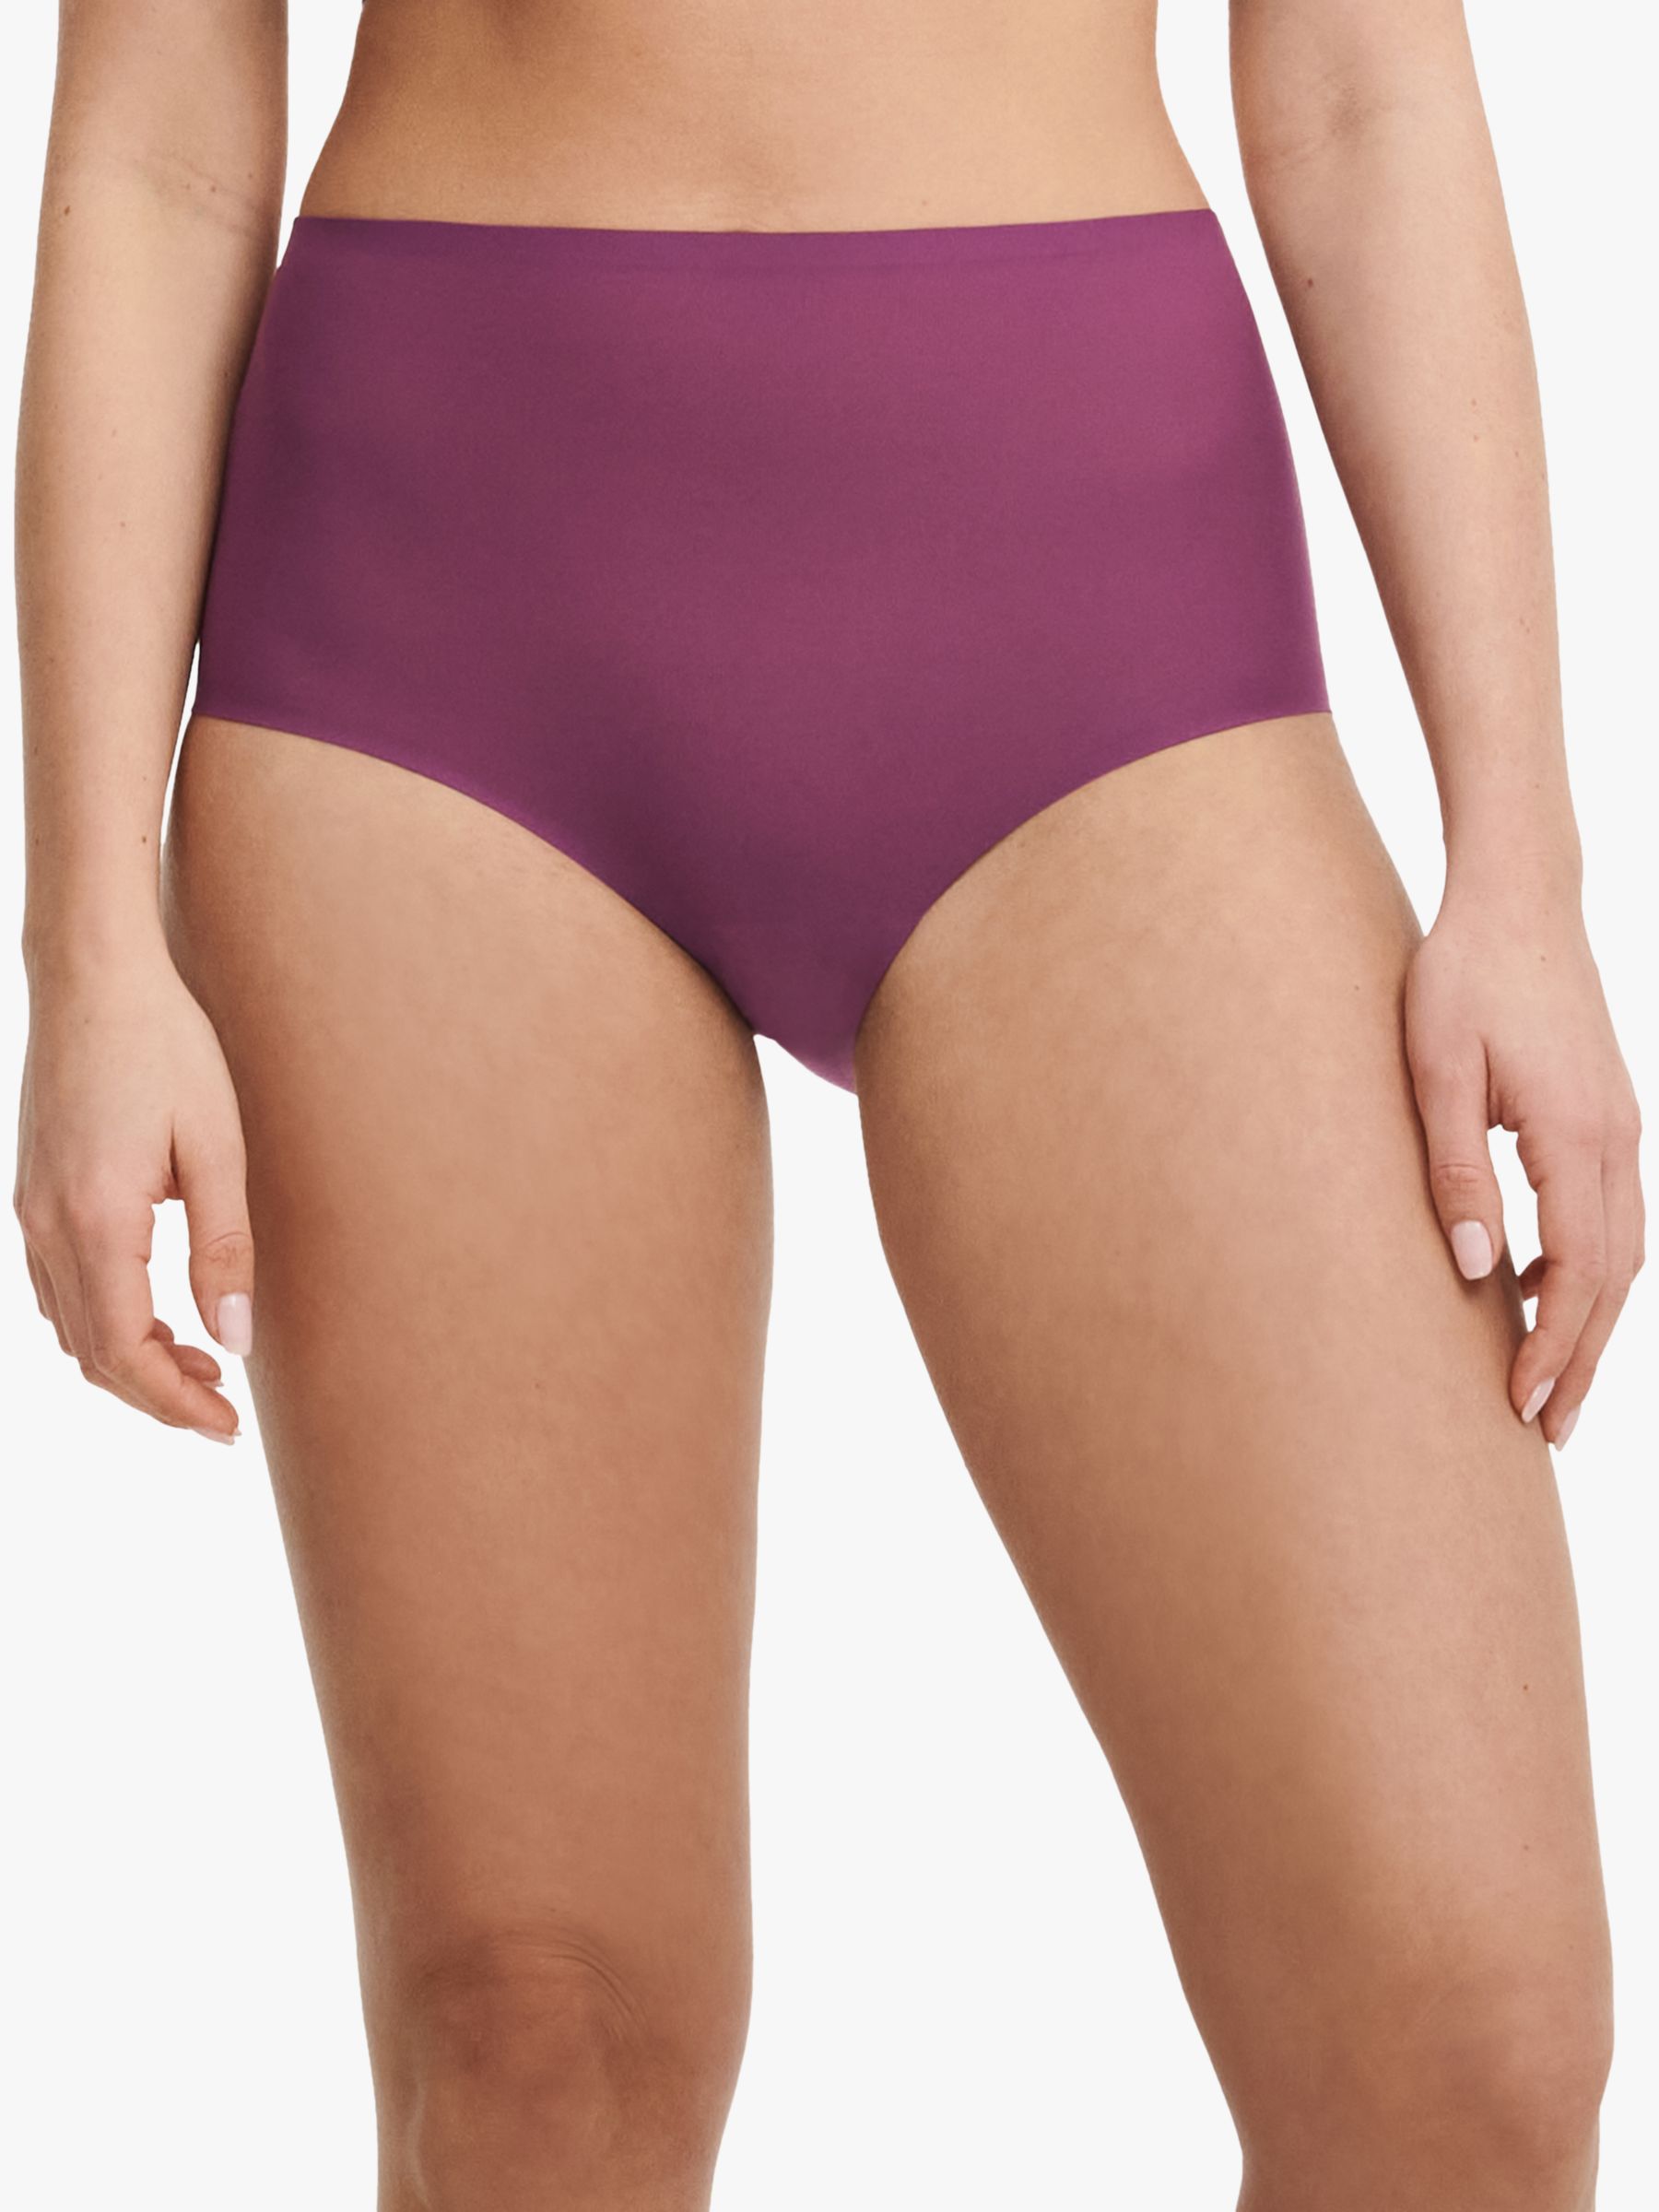 Chantelle Soft Stretch High Waisted Knickers, Tannin Purple, One Size